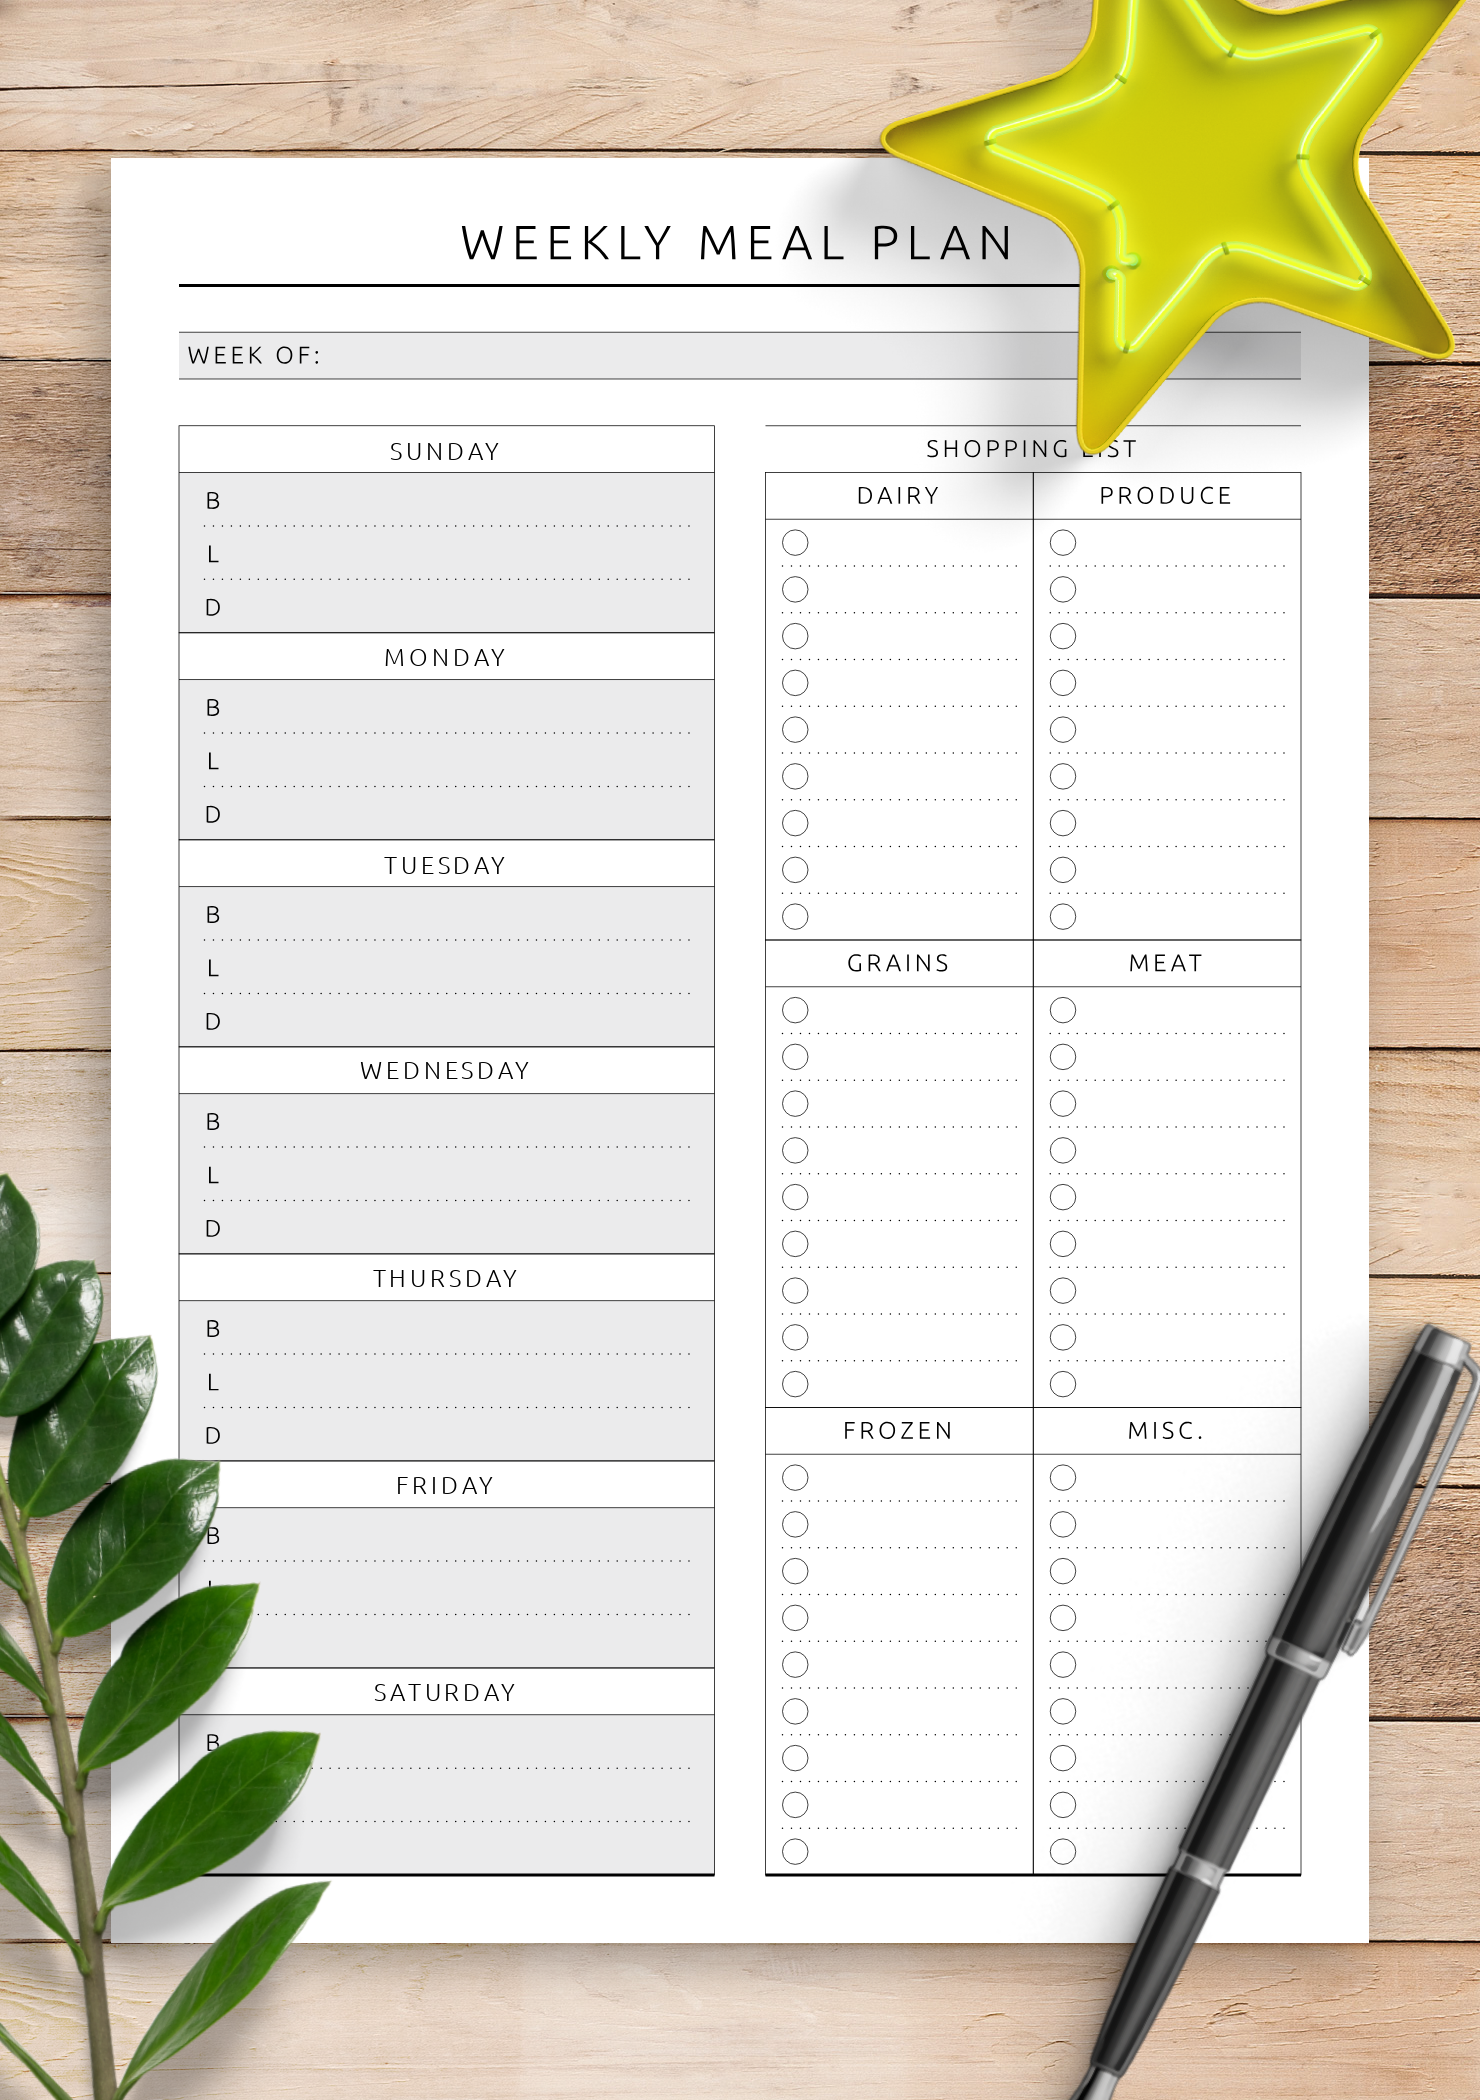 Download Printable Weekly Meal Plan with Shopping List - Original Style PDF